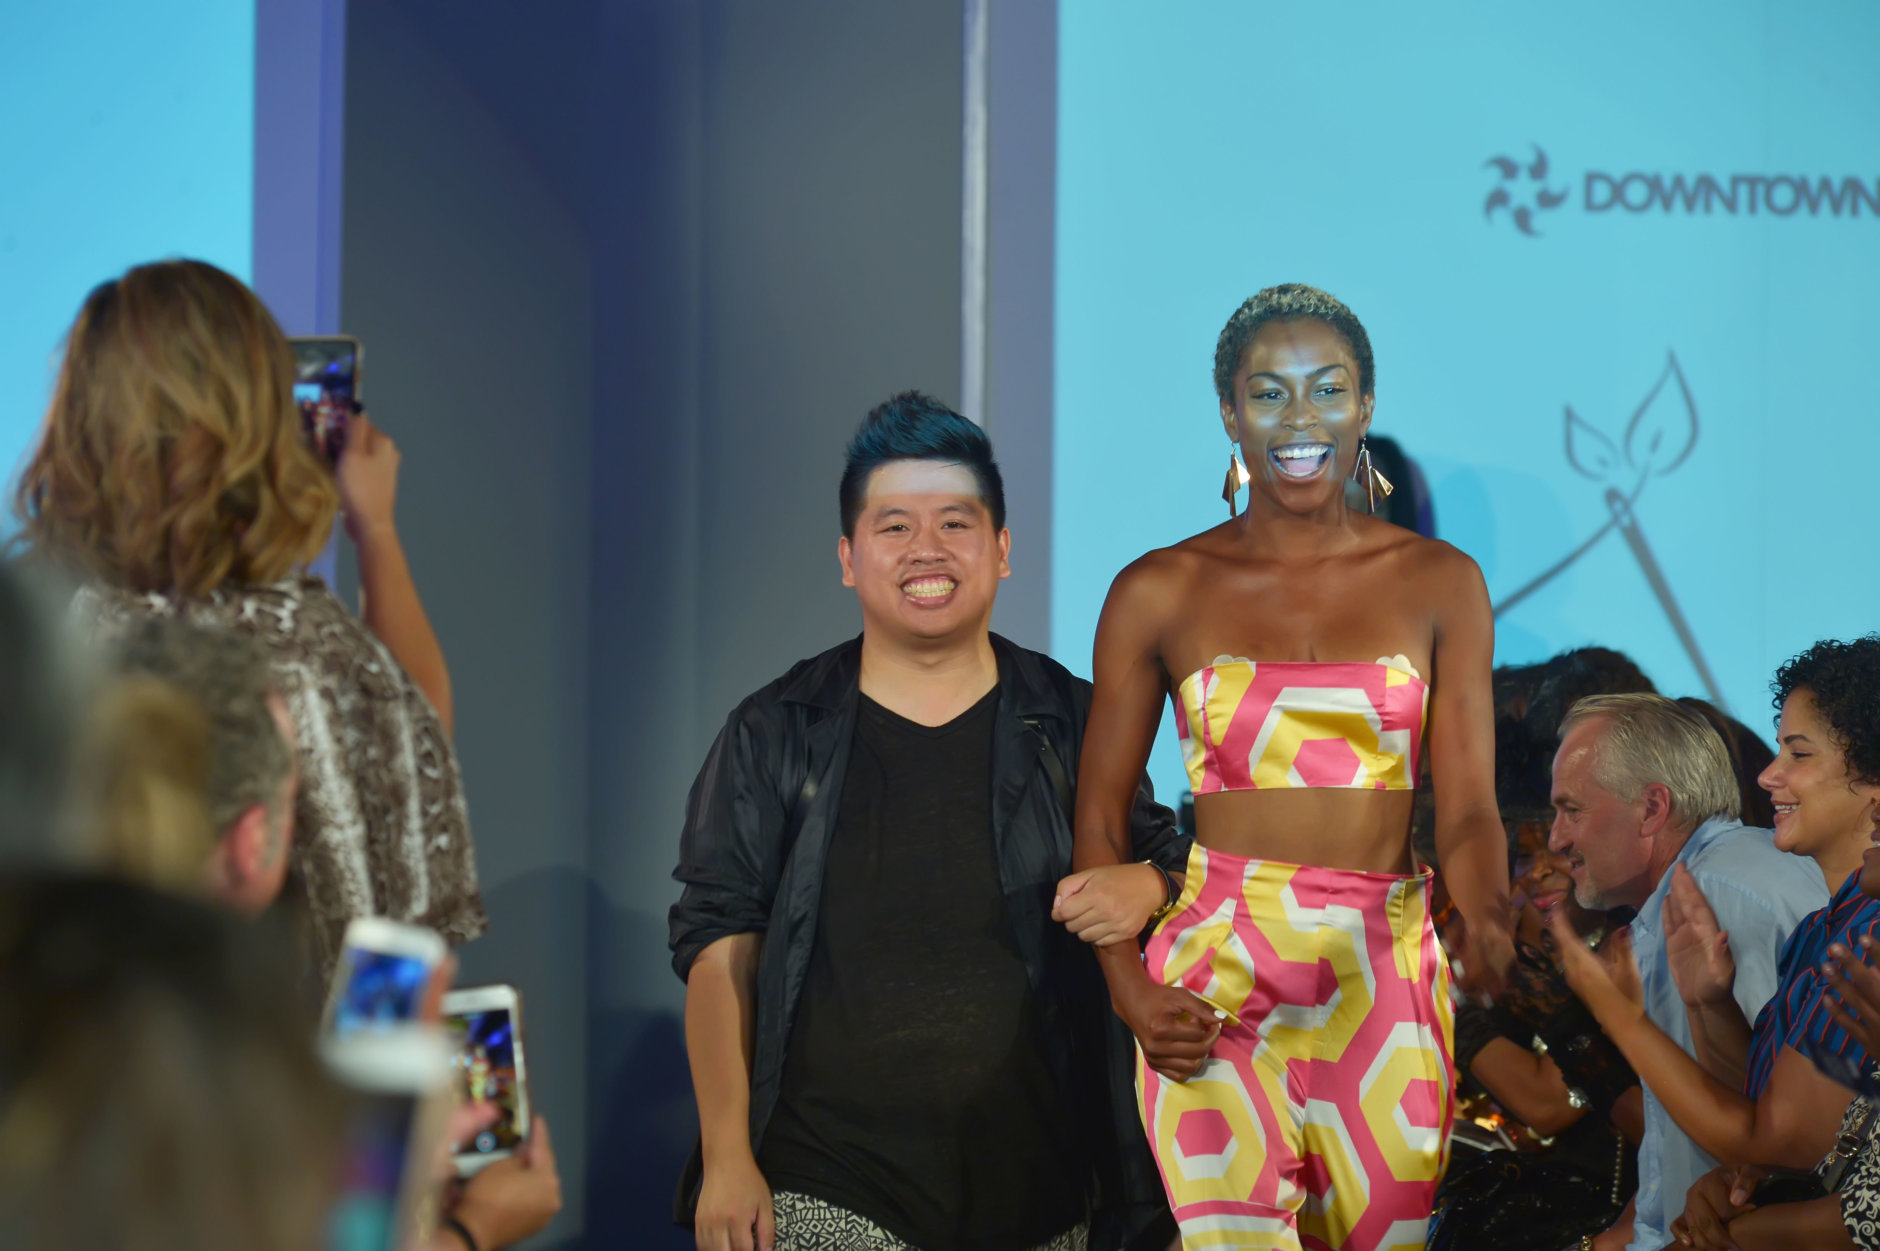 Fashion designer Frank Huynh of Fashions by Le Tam takes a final bow with a model wearing pieces from the label's spring/summer 2019 line at the DowntownDC Business Improvement District (BID) District of Fashion runway show. (Courtesy Shannon Finney/<a href="https://www.shannonfinneyphotography.com/index" target="_blank" rel="noopener noreferrer">shannonfinneyphotography.com</a>)